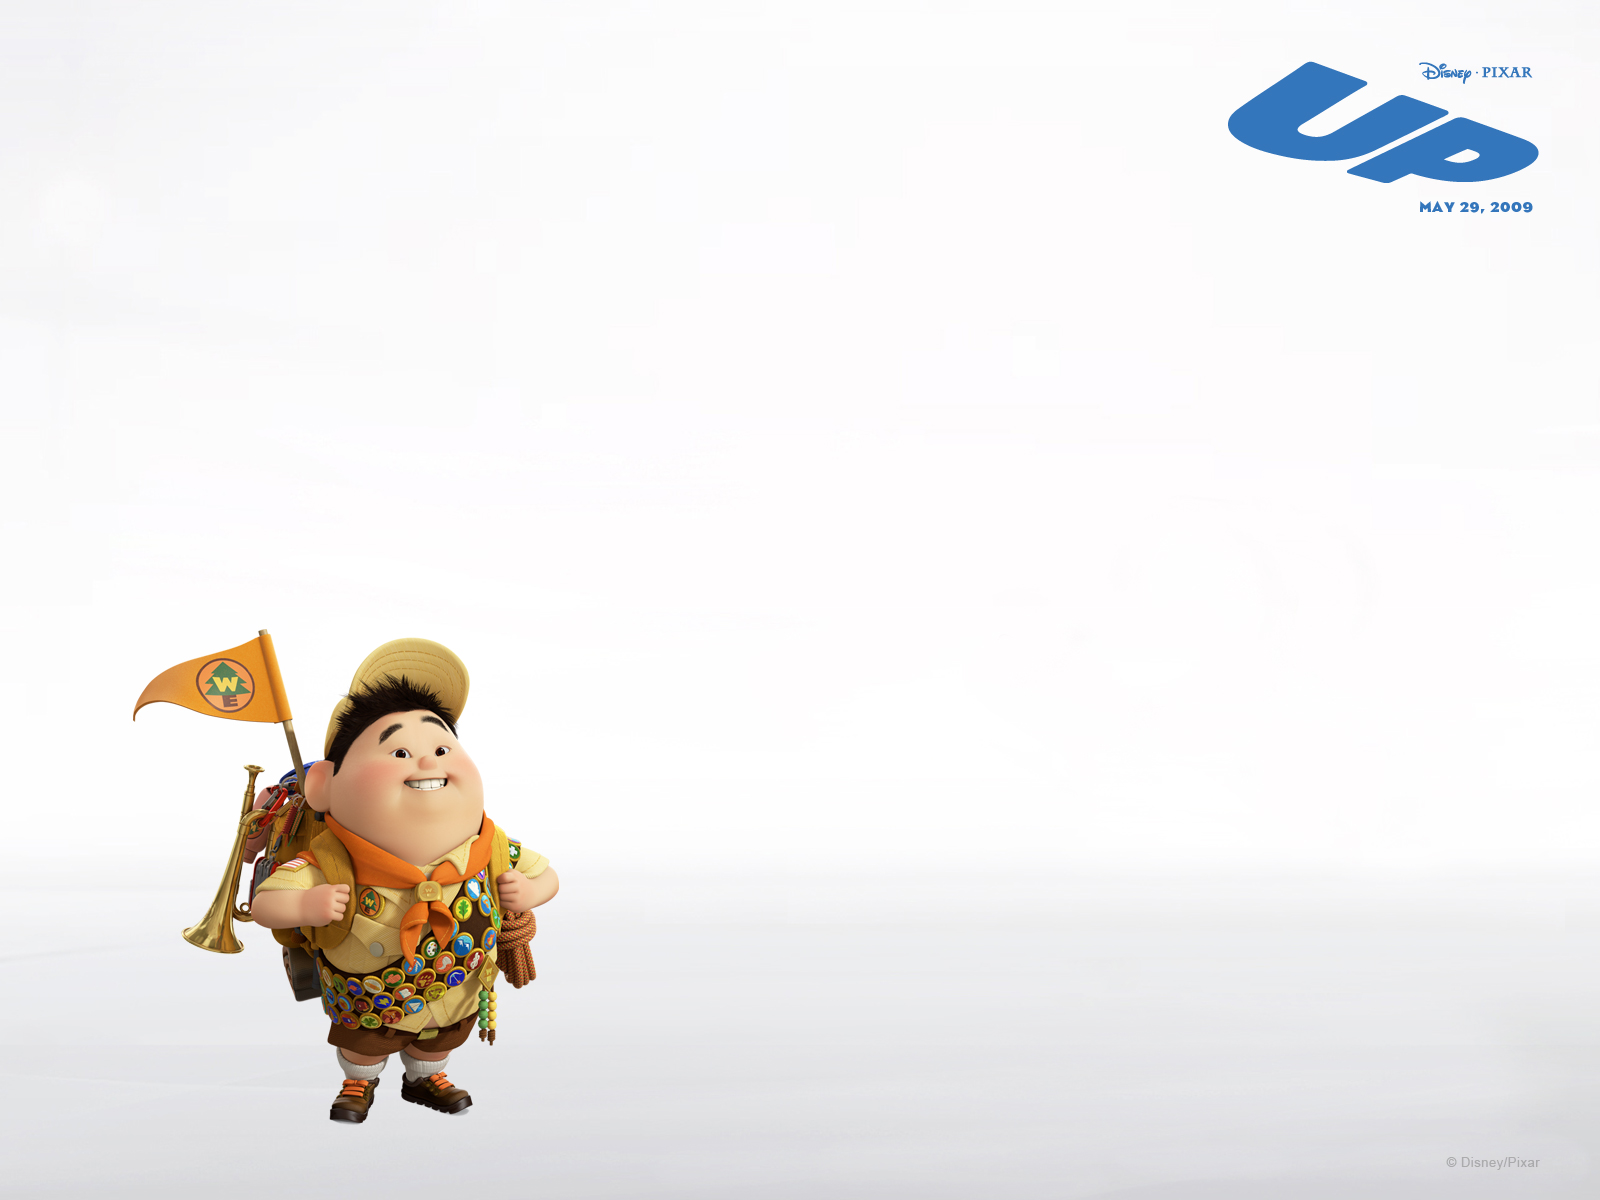 Up (Movie) wallpapers for desktop, download free Up (Movie) pictures and  backgrounds for PC 